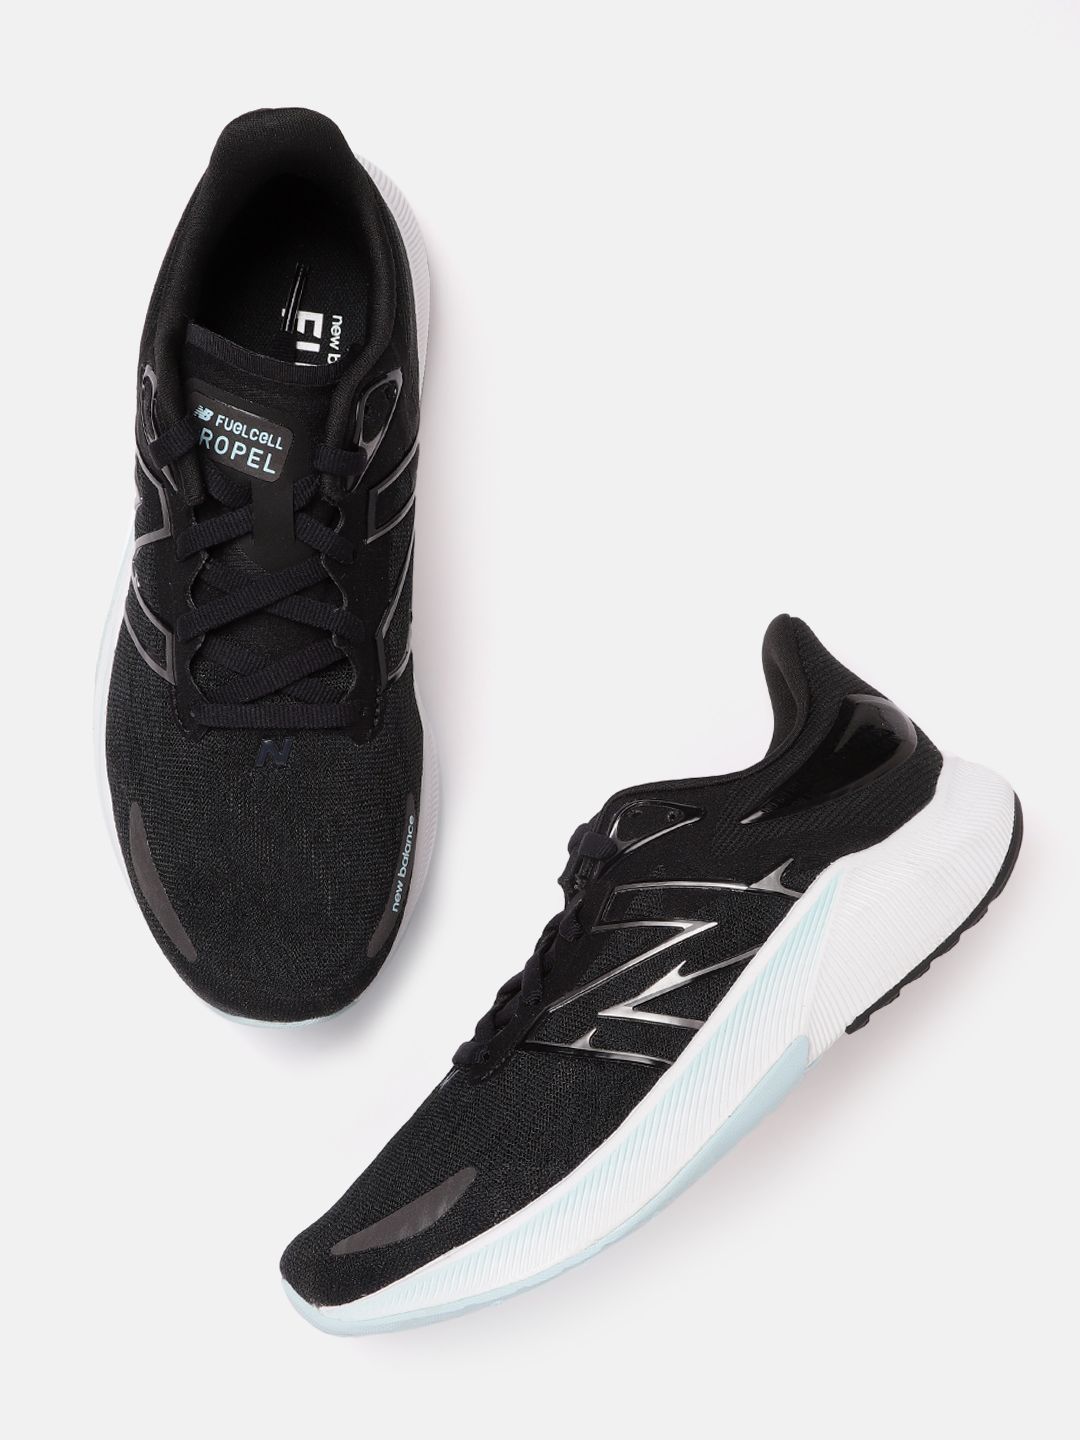 New Balance Women Black Woven Design Running Shoes Price in India